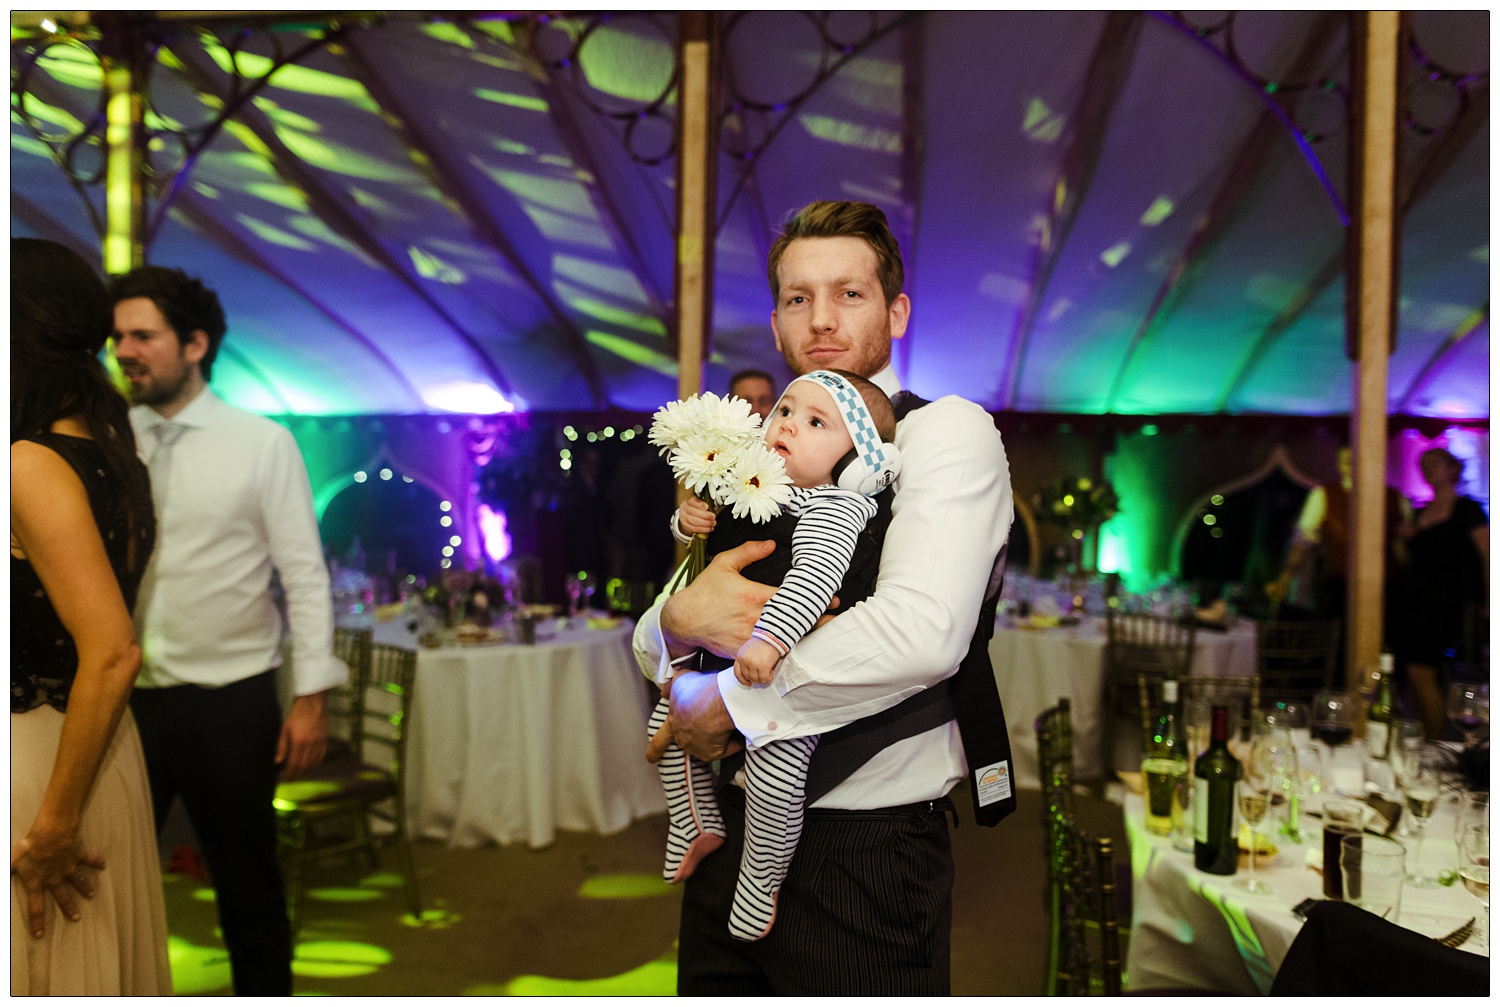 A man with his baby in a carrier. The baby is wearing ear defenders and is holding white flowers. They are at a wedding reception.